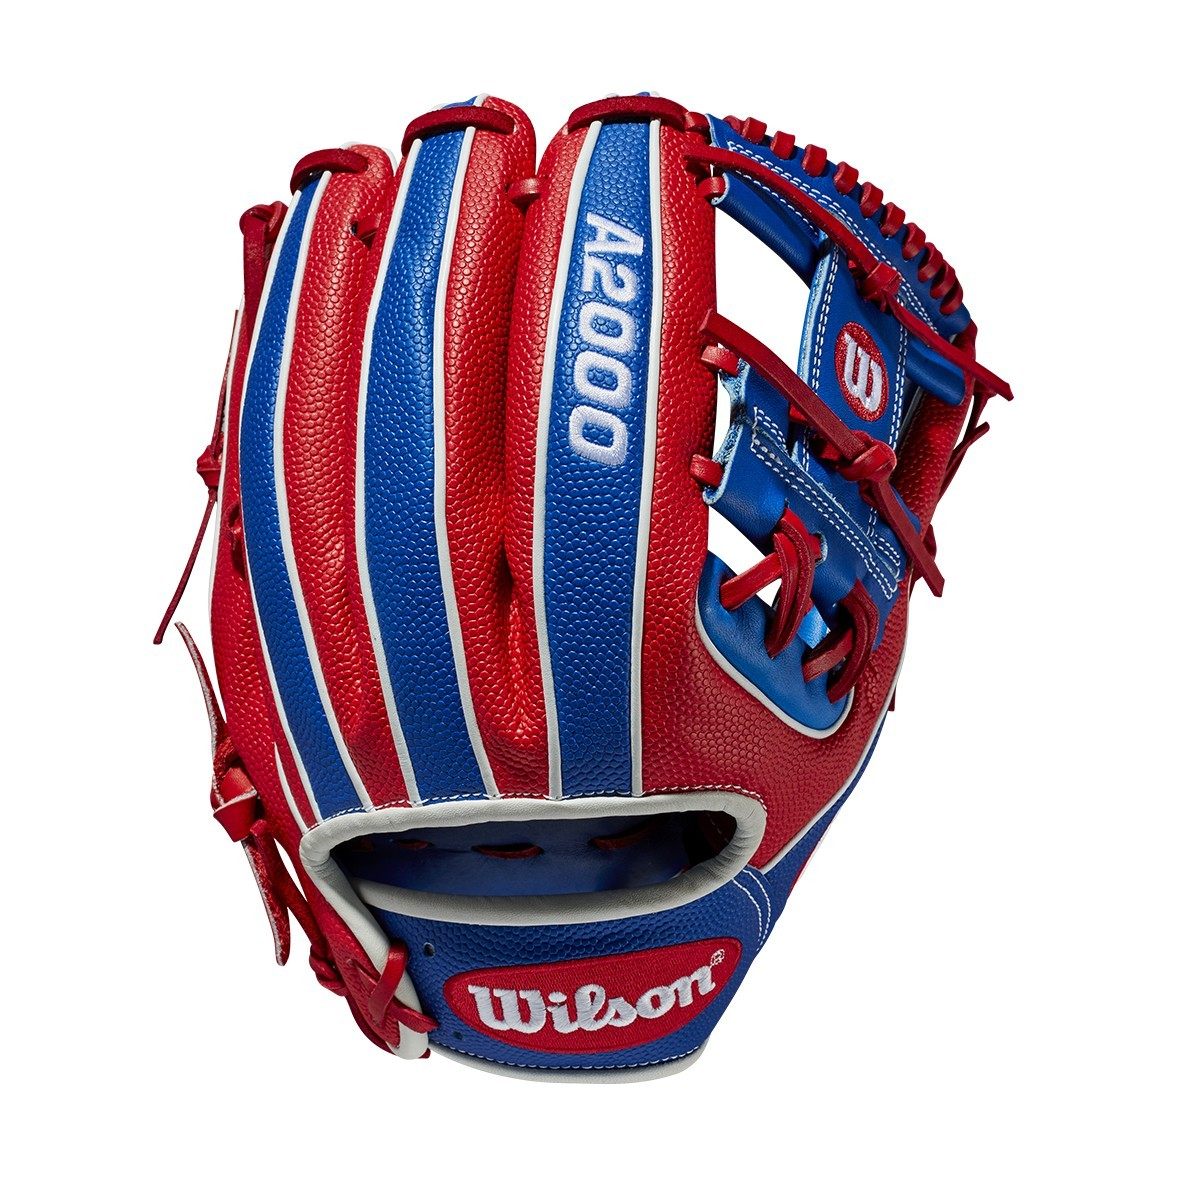 Wilson Glove of the Month Instant Replay Sports